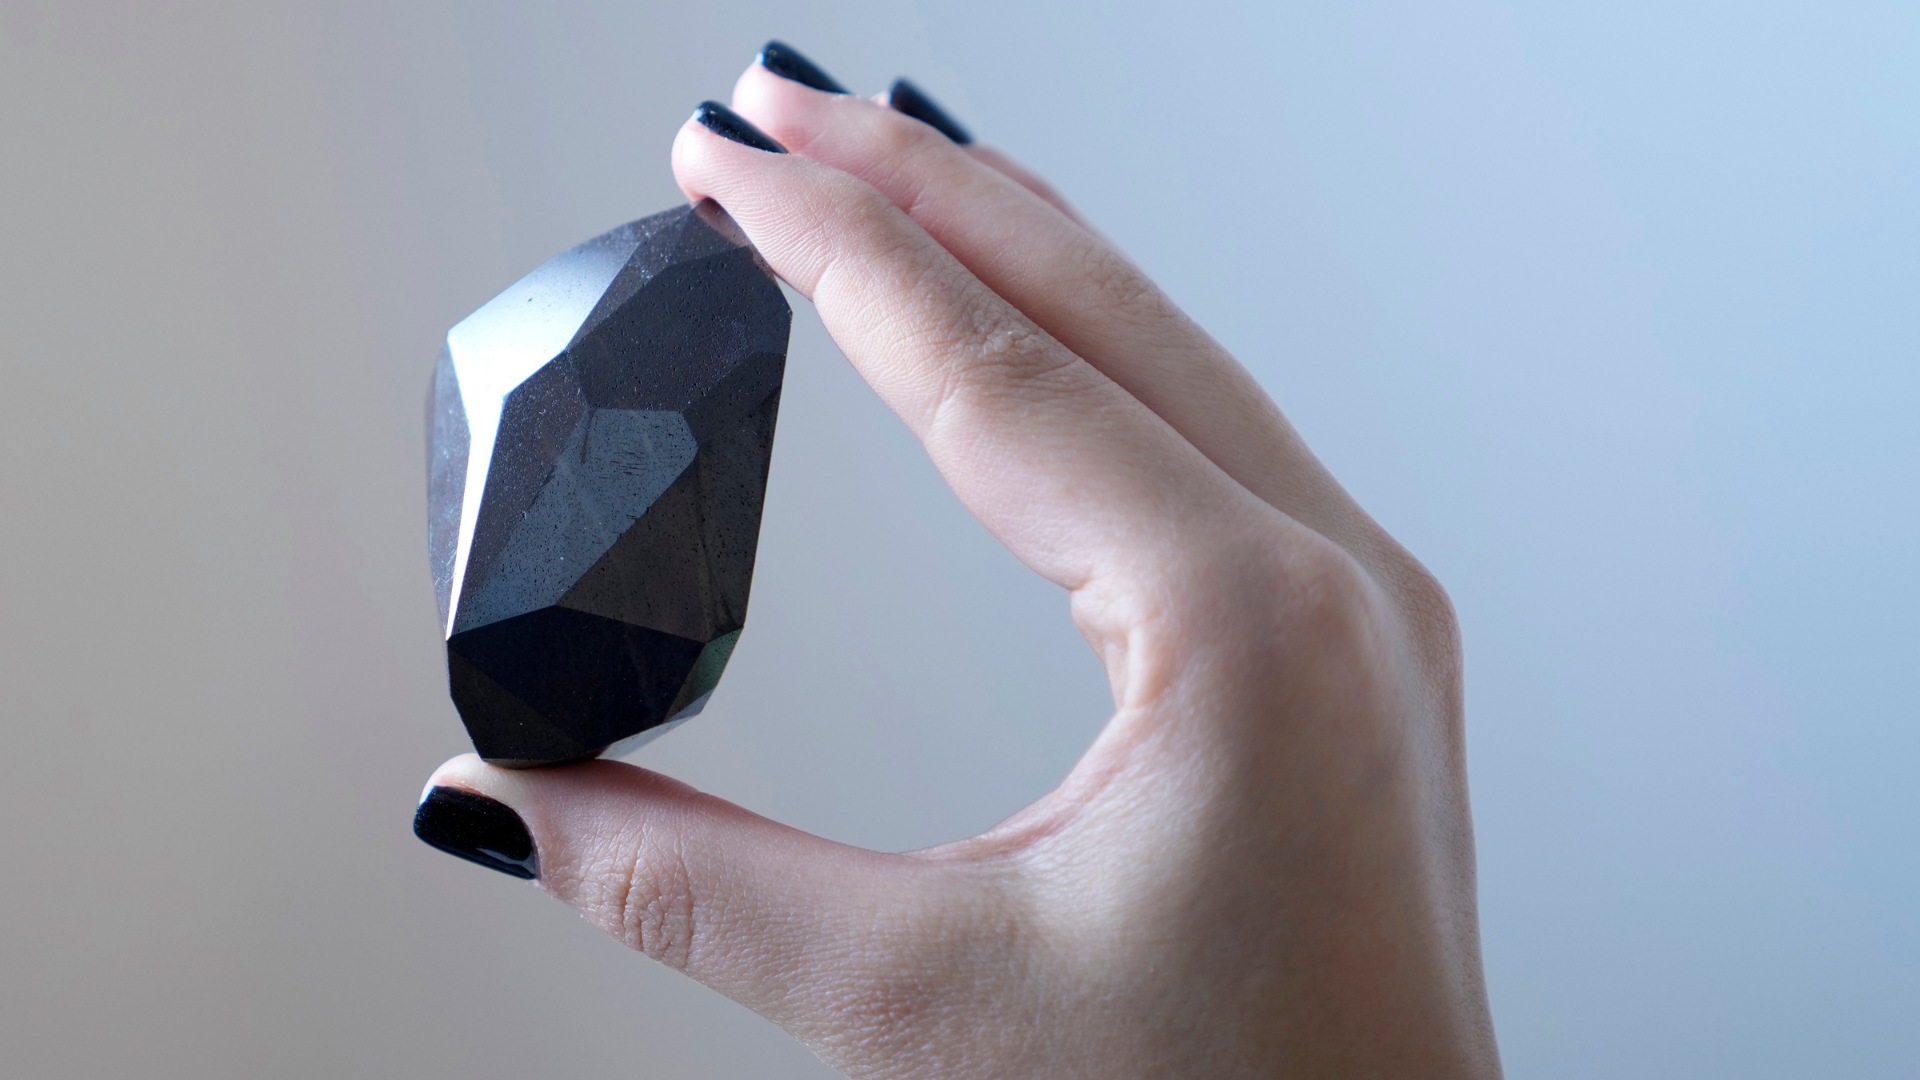 An employee of Sotheby's Dubai presents a 555.55 Carat Black Diamond "The Enigma" to be auctioned a...